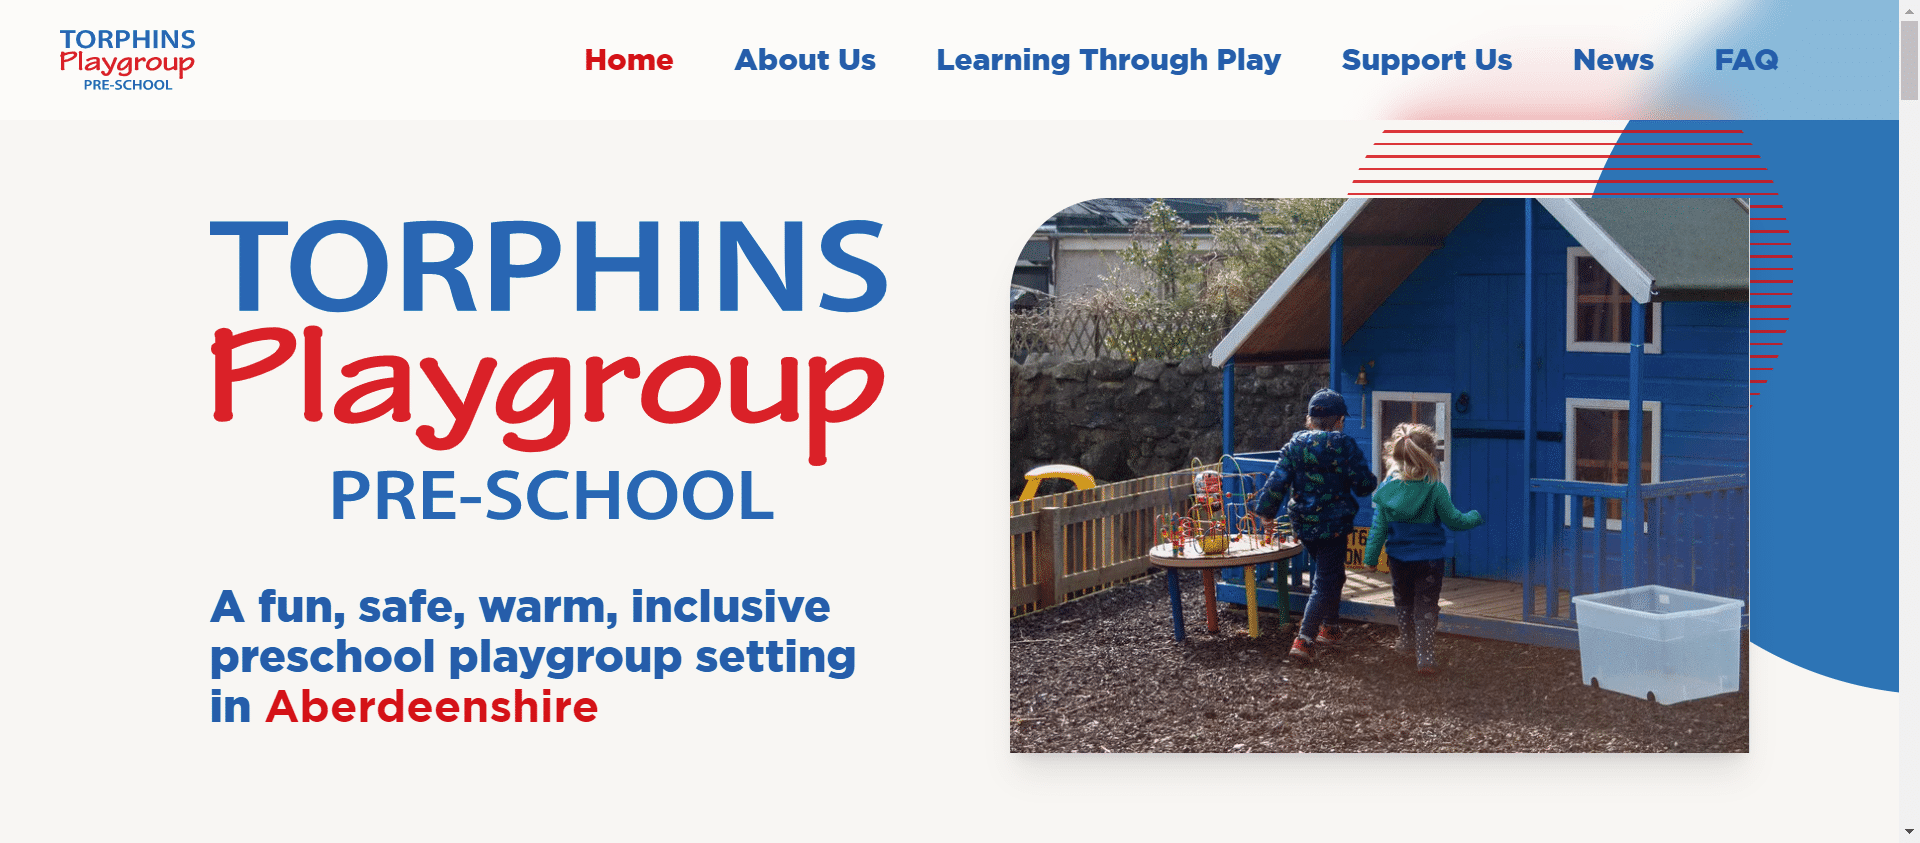 Torphins Playgroup